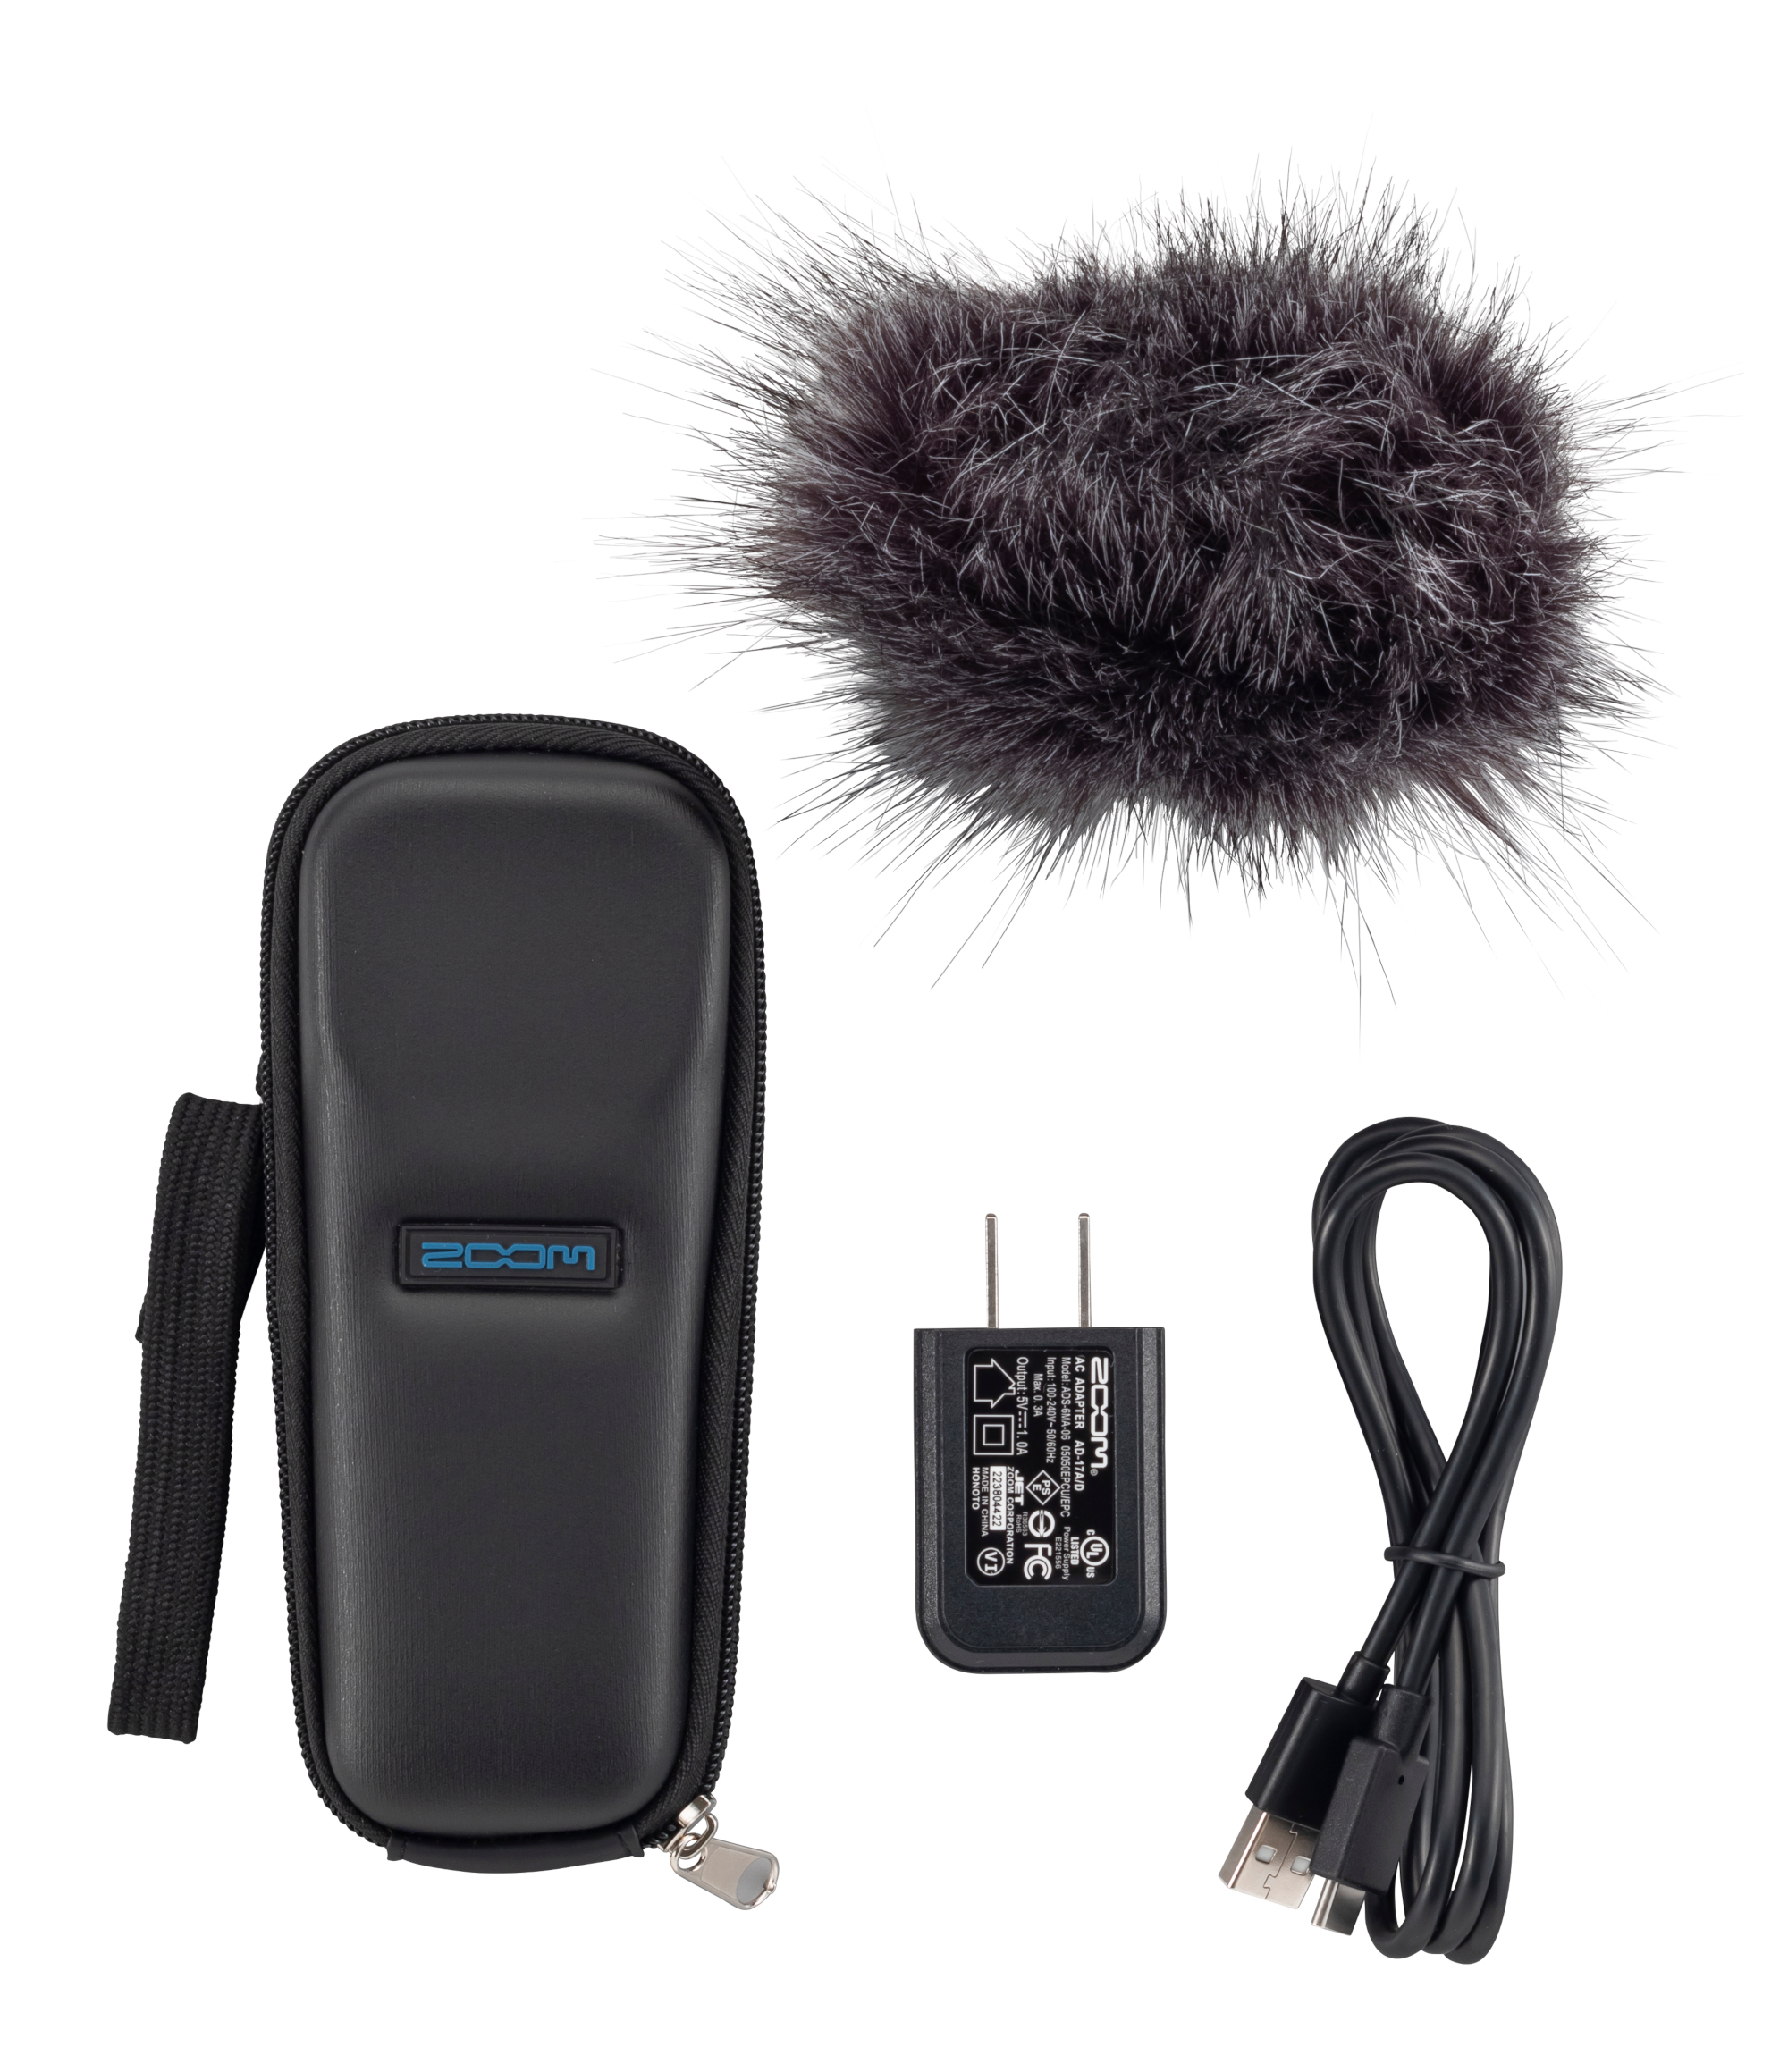 Zoom Aph-1e - Accessories set for recorder - Variation 2